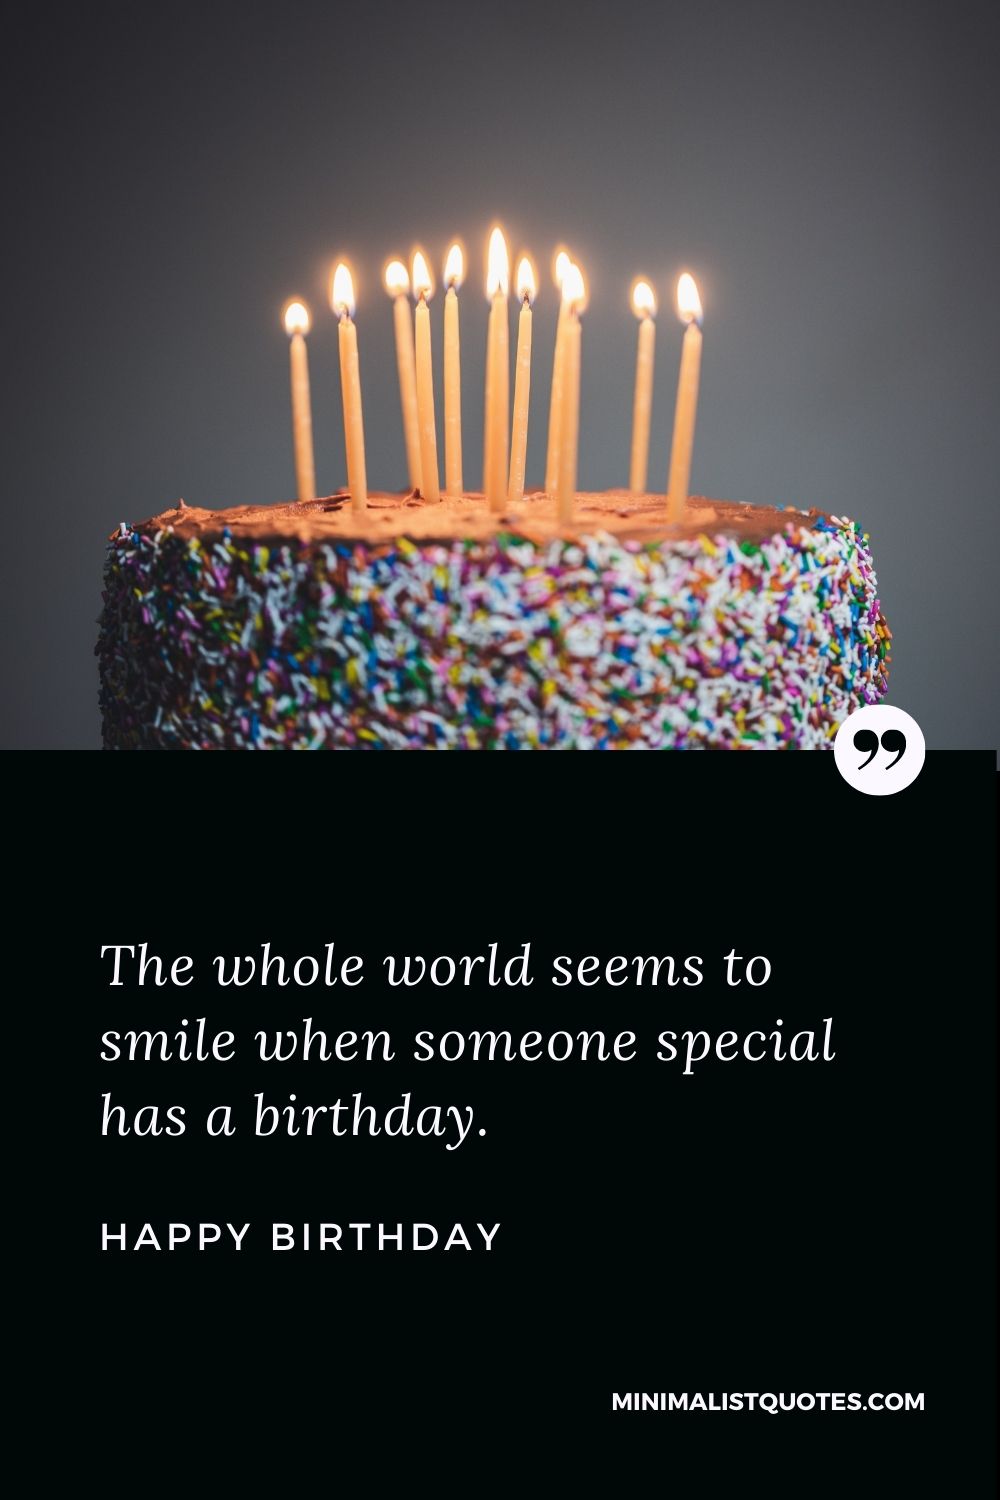 Happy Birthday Wish - The whole world seems to smile when someone special has a birthday.